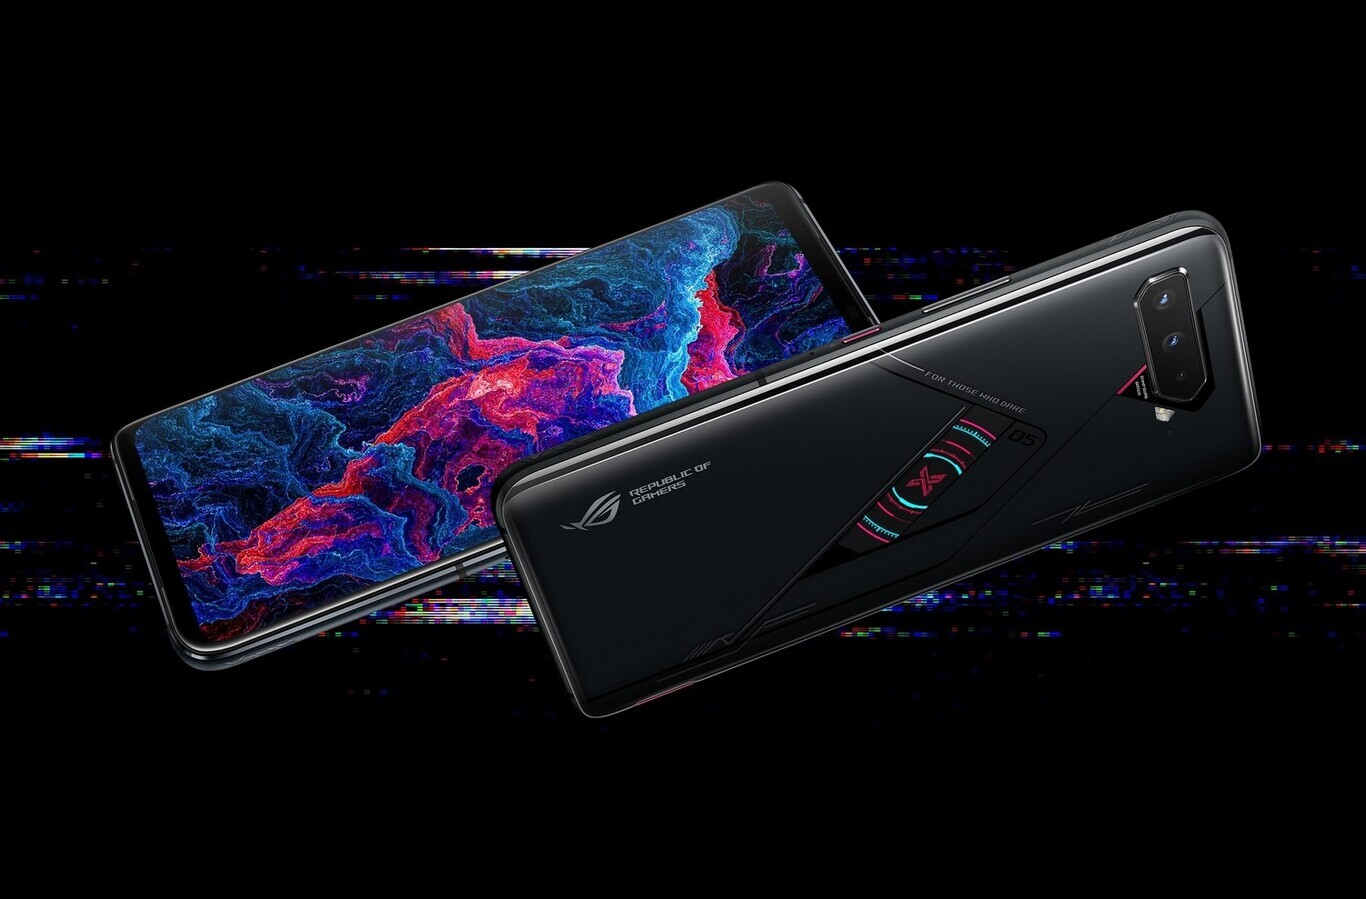 ASUS Rog Phone 5s and 5s Pro